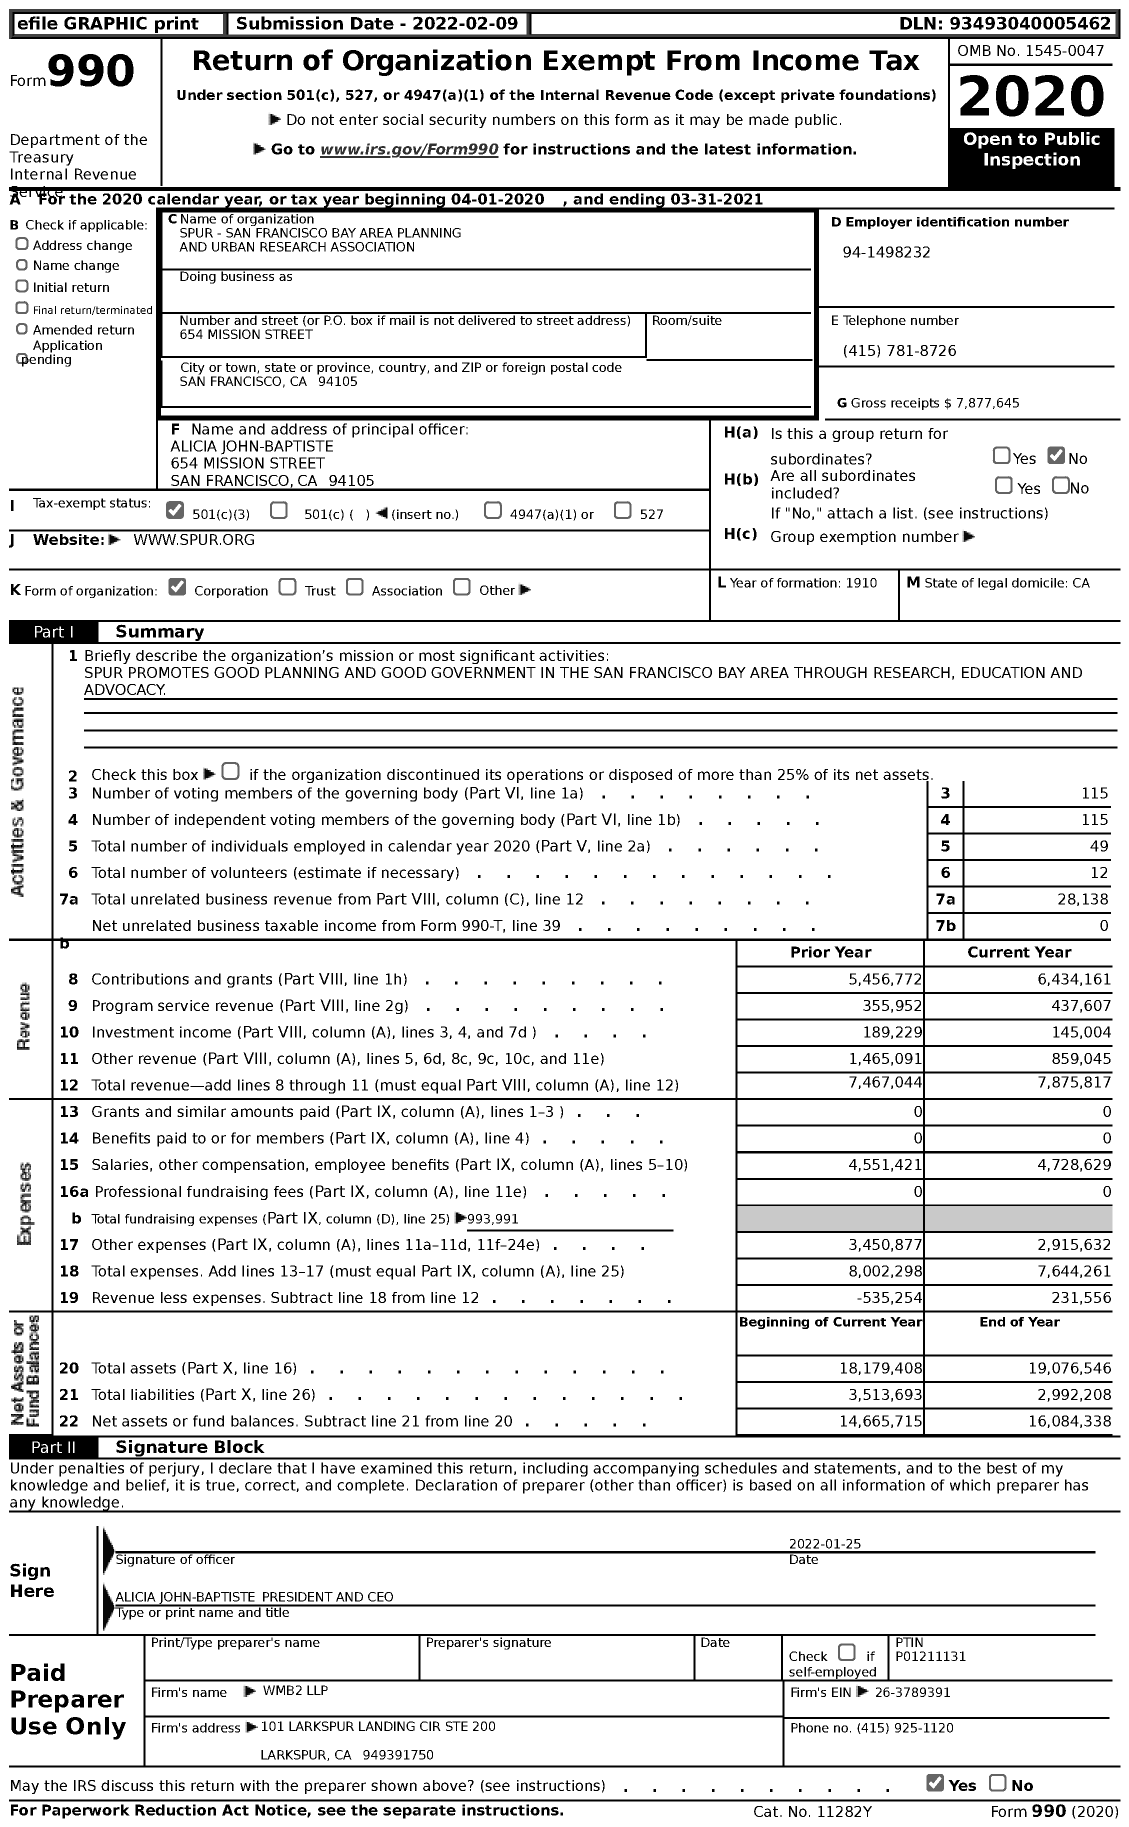 Image of first page of 2020 Form 990 for San Francisco Bay Are Planning and Urban Research Association (SPUR)